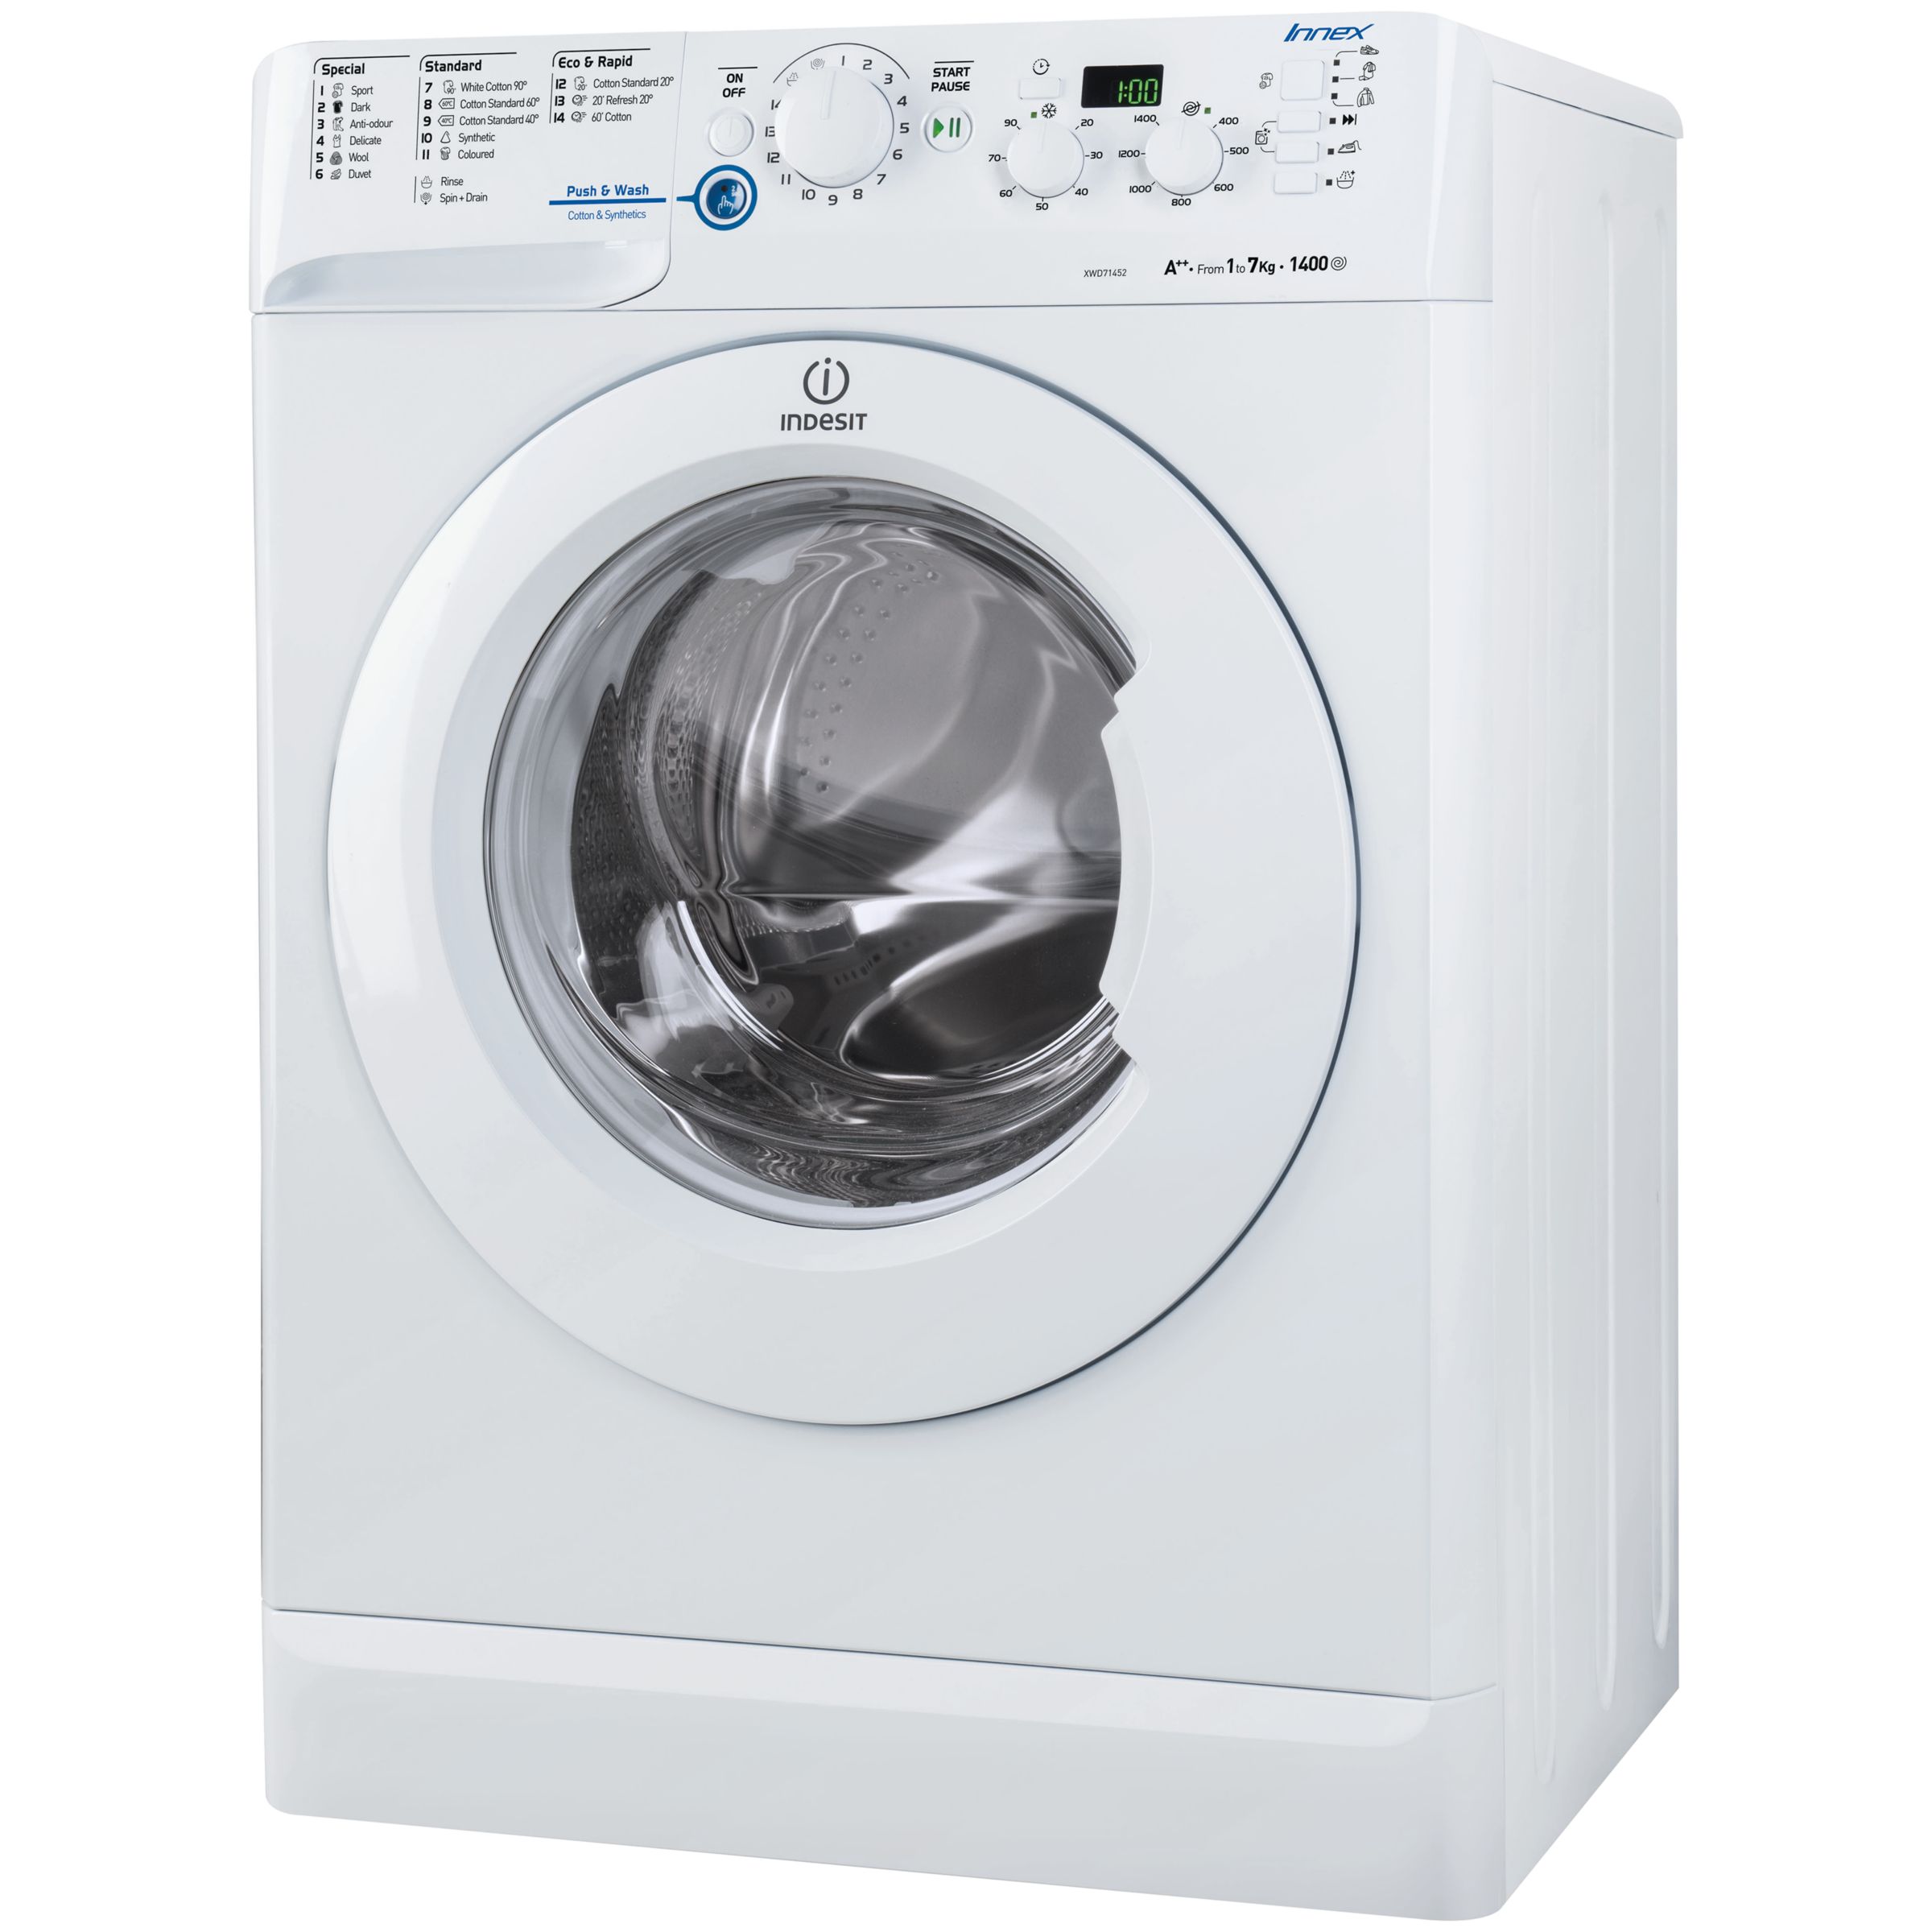 Indesit XWD71452W Freestanding Washing Machine, 7kg Load, A++ Energy Rating, 1400rpm Spin, White ...